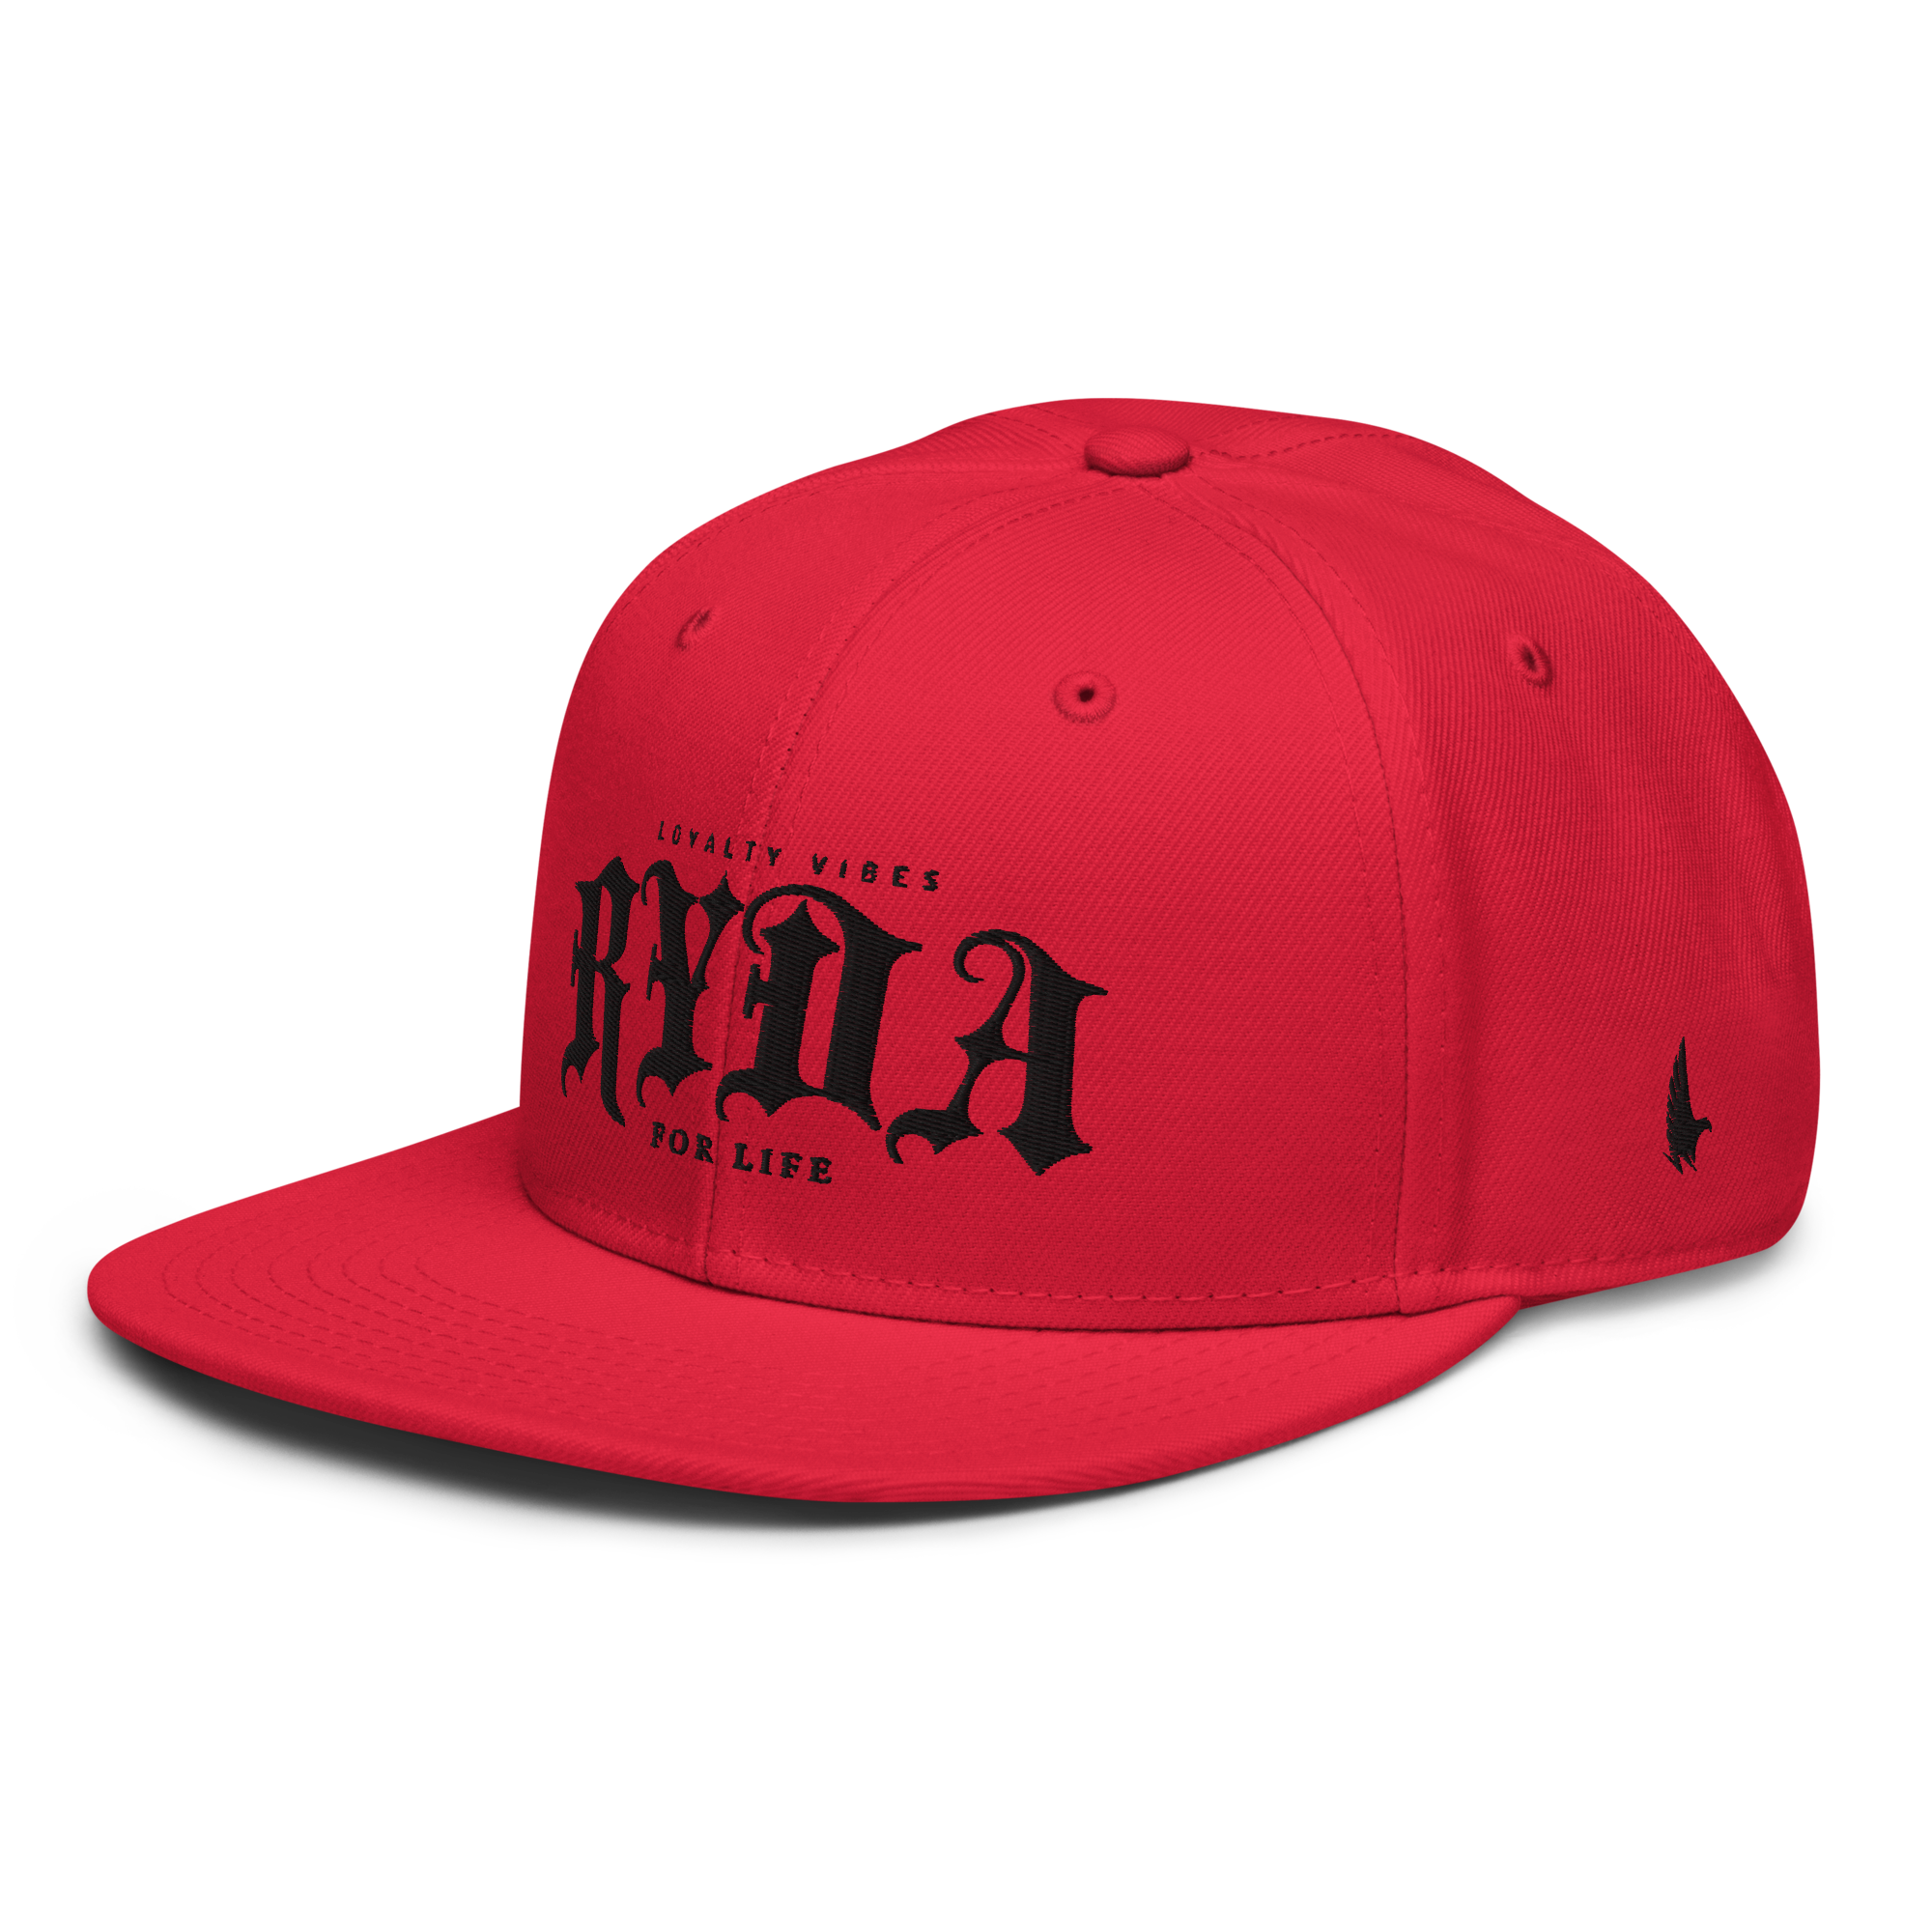 Ryda For Life Snapback Hat - Red/Black - Loyalty Vibes